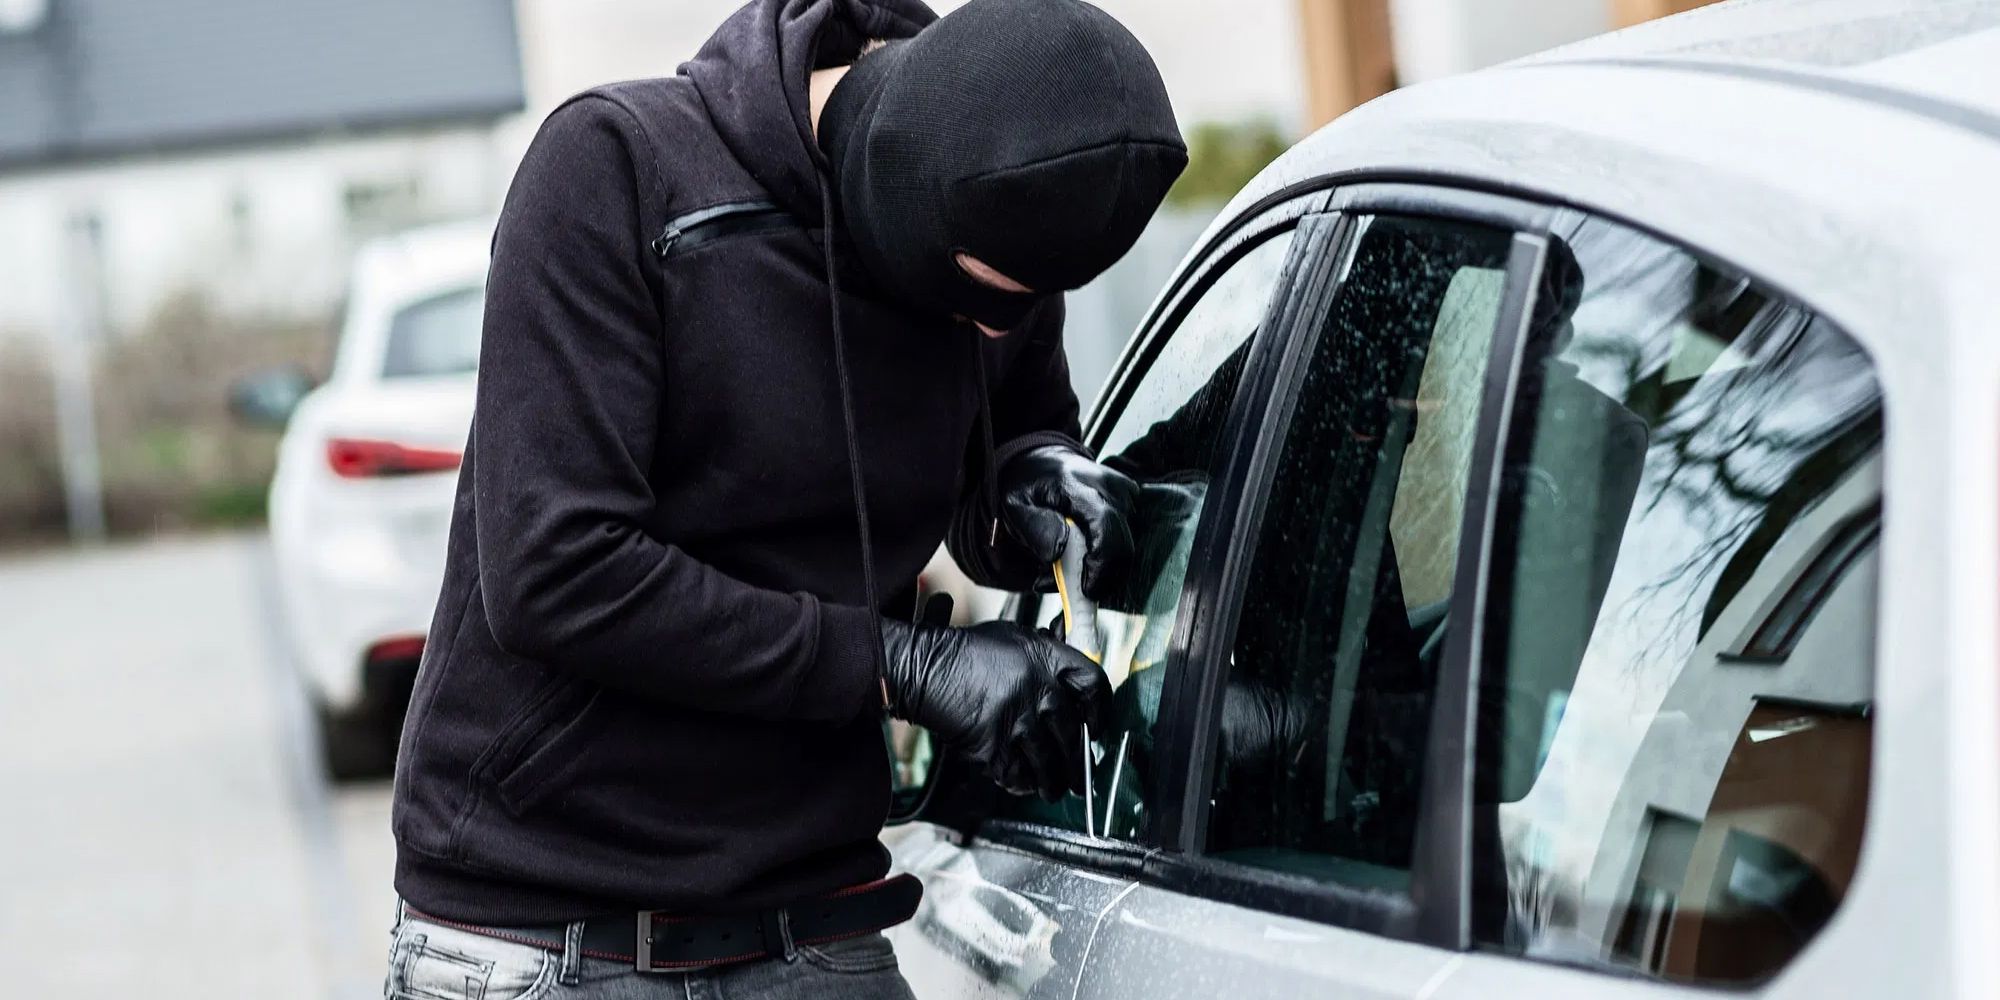 10 Proven AntiTheft Methods To Prevent Car Thefts and BreakIns on Any